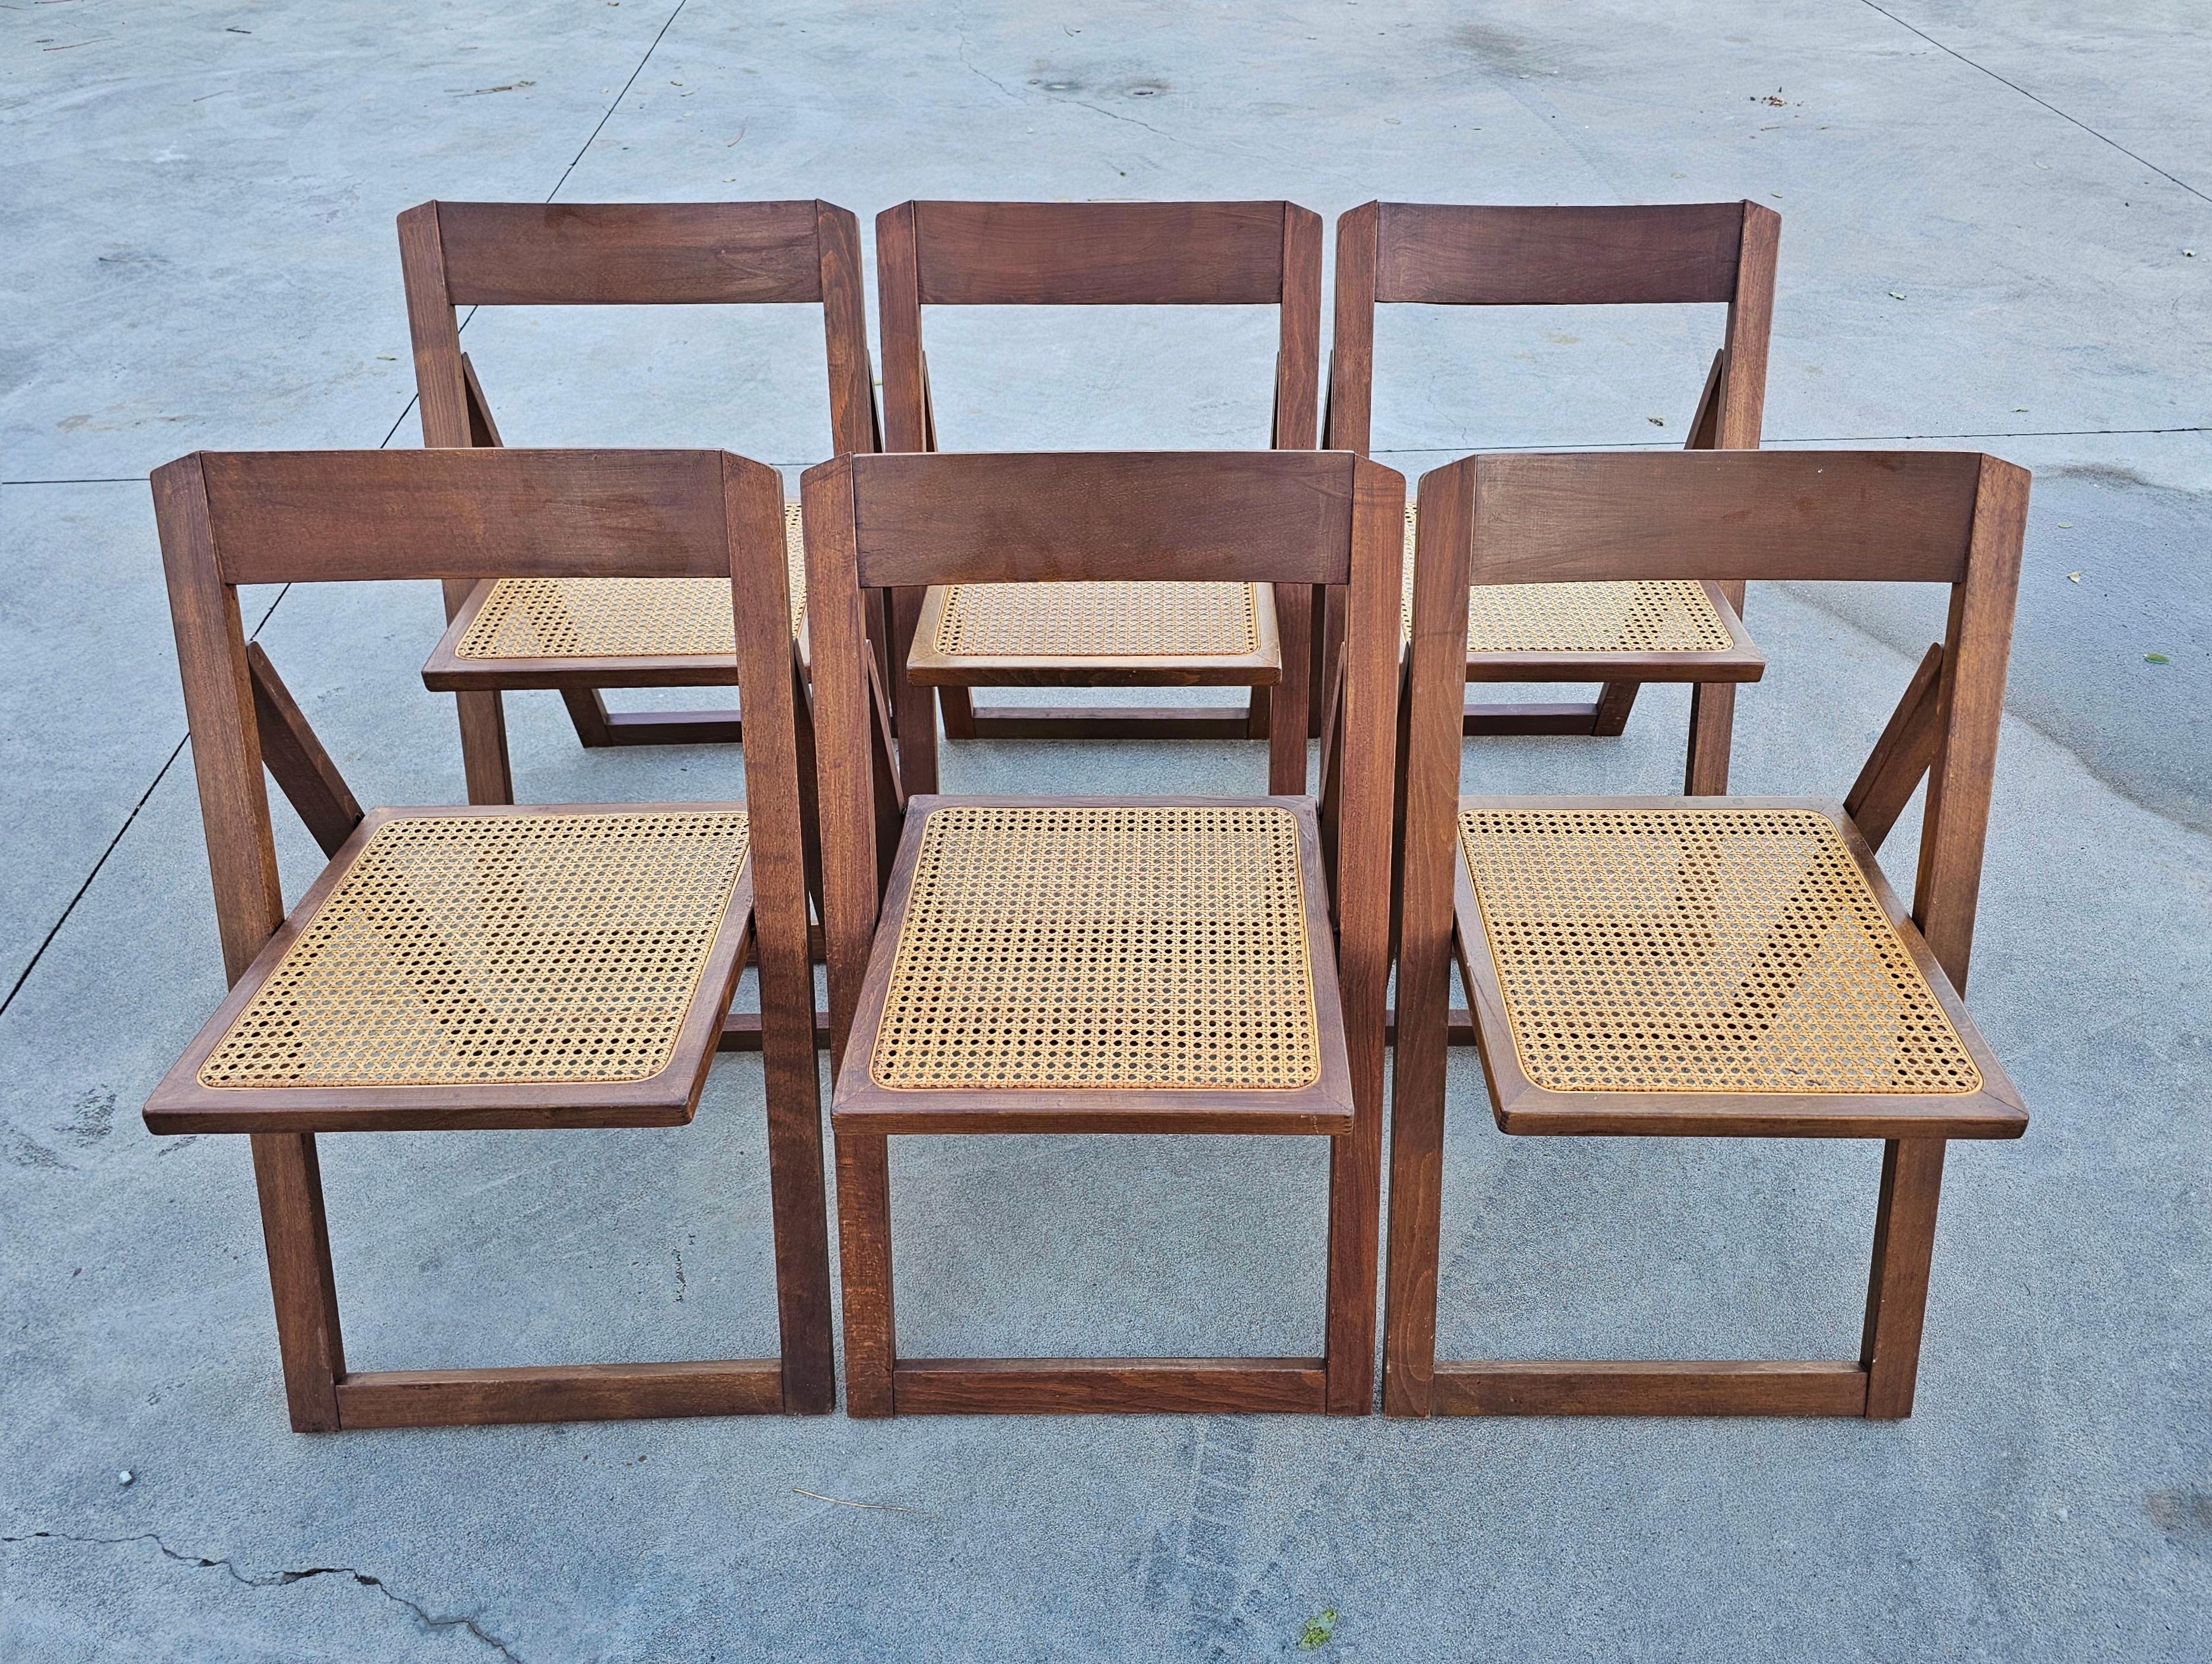 This listing features a set of 6 Mid Century Modern folding chairs with cane seats designed in style of Trieste Folding Chair by Aldo Jacober for Alberto Bazzani. The chairs are made in Italy in 1980s.

Very good vintage condition with some signs of